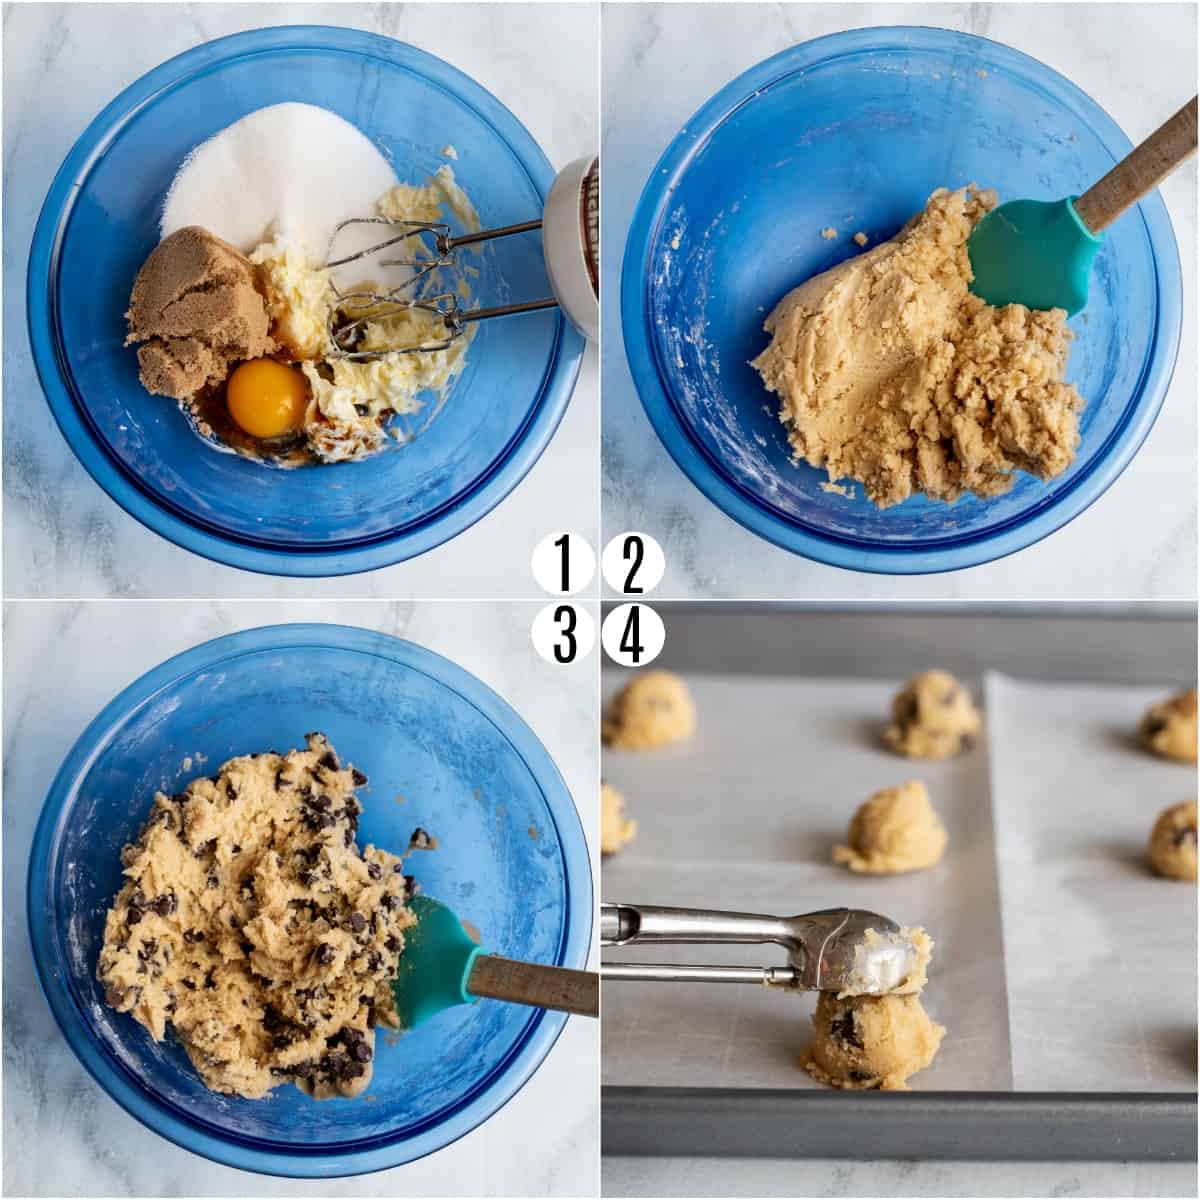 Step by step photos showing how to make chocolate chip cookie dough.